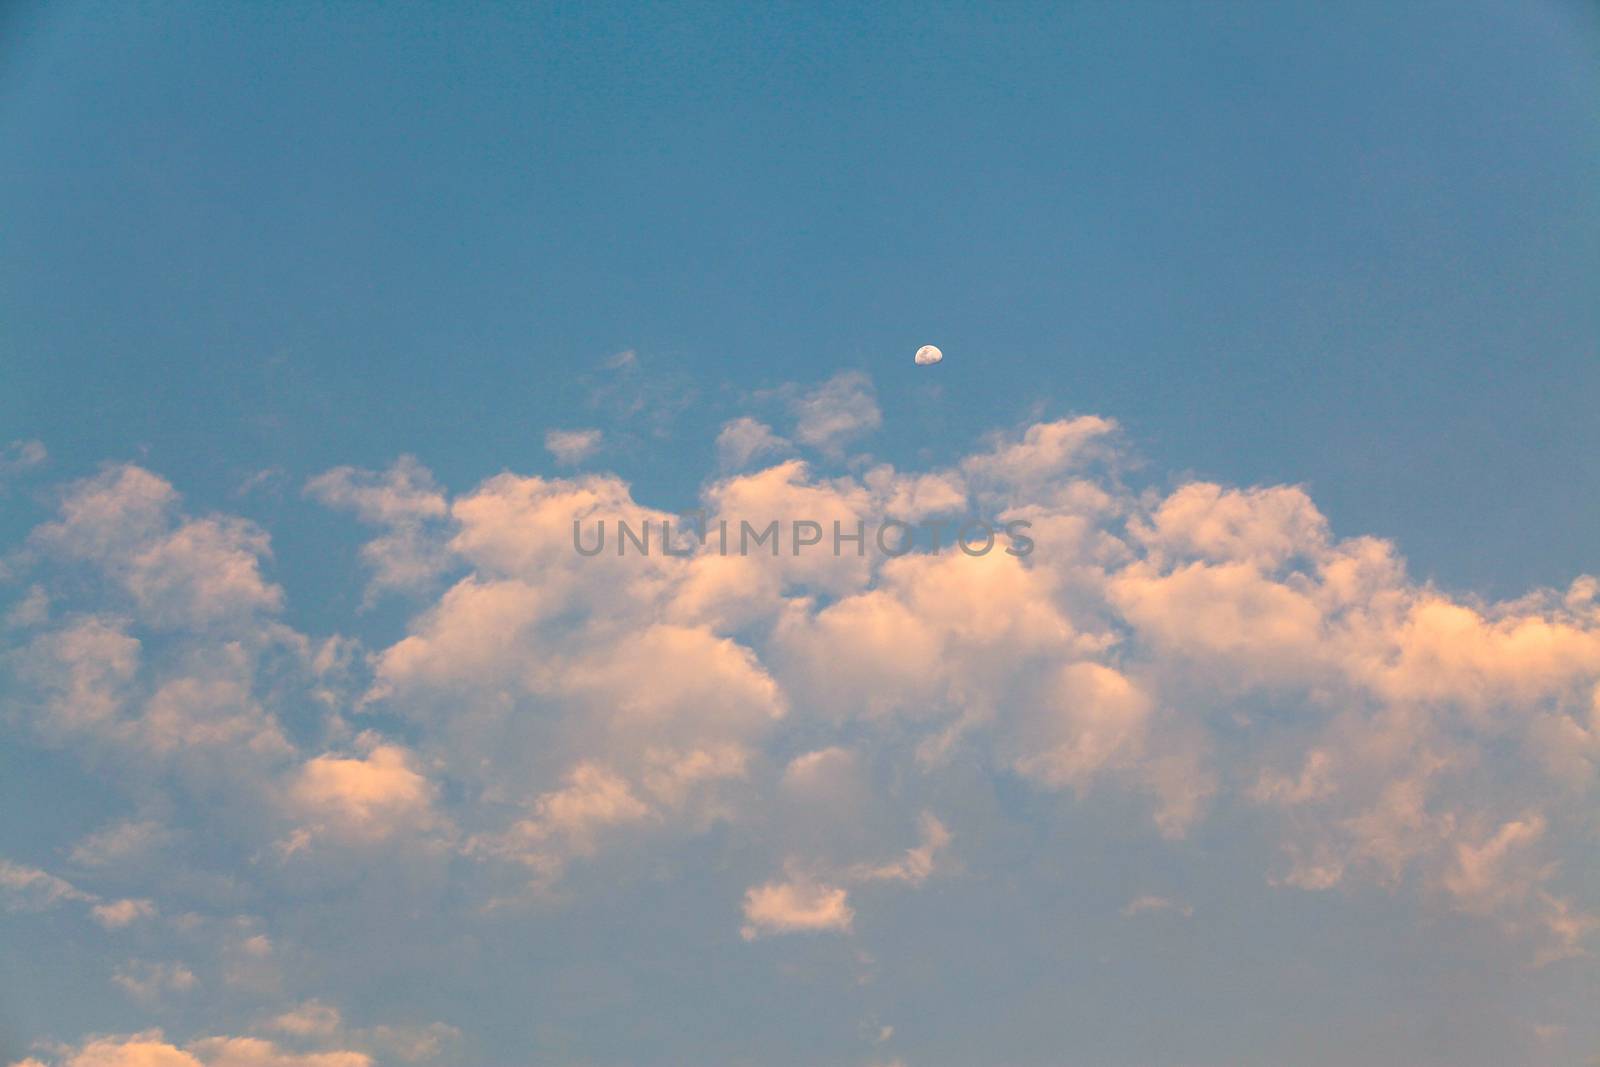 Cloudy and moon in sky before sunset for background by pumppump